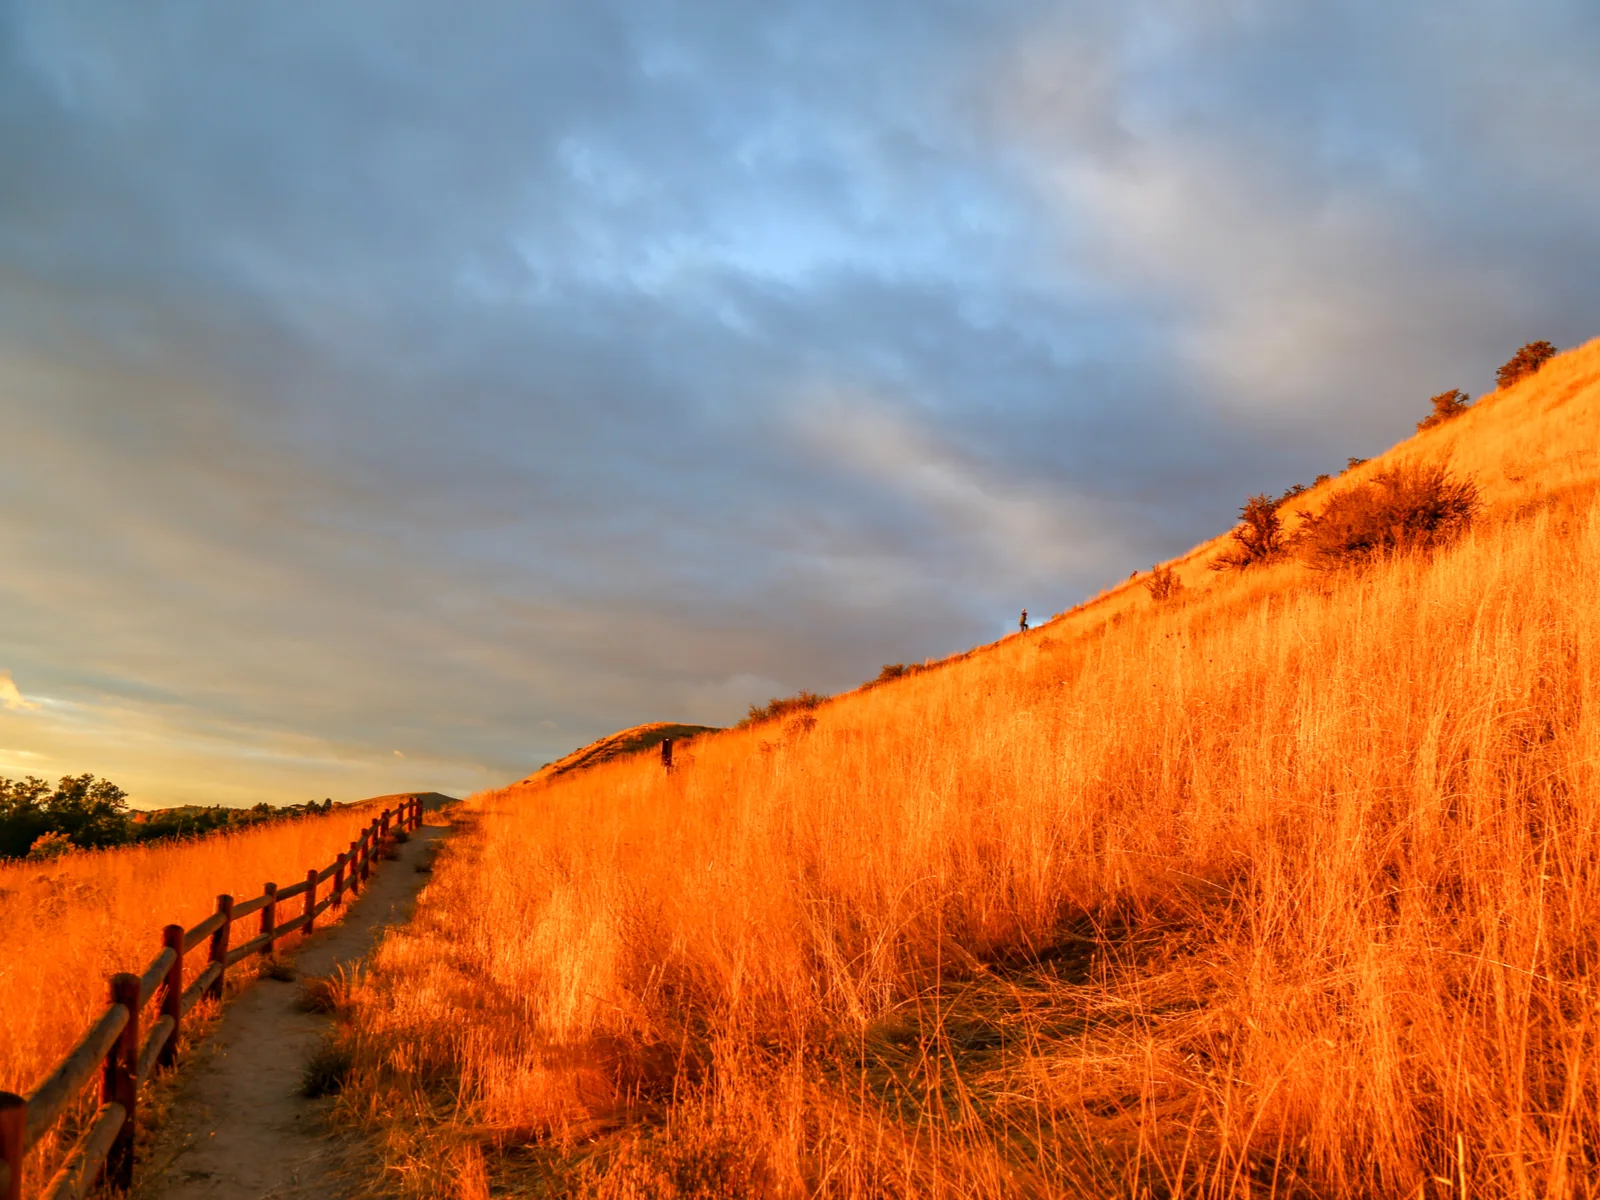 Sunset over the slop of Camel’s Back Park, one of the best things to see in Idaho, with a path guided by wooden fence